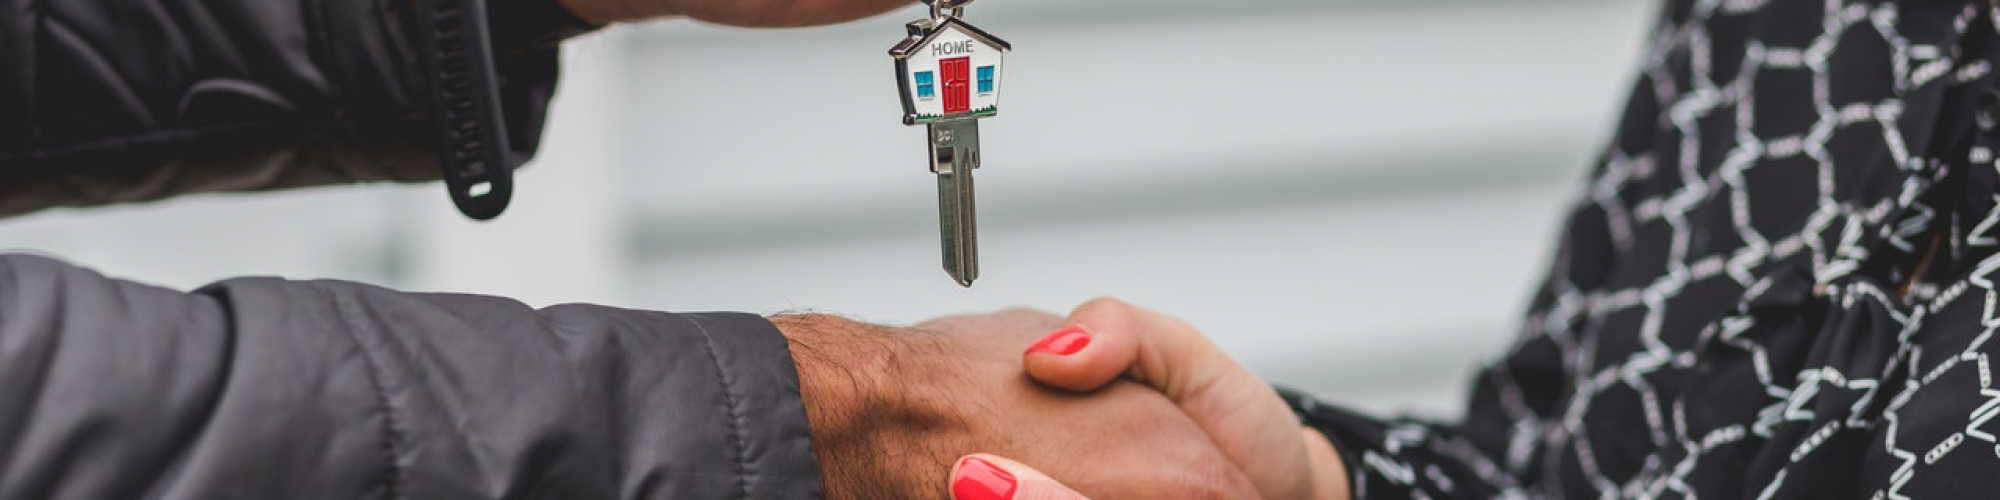 handing over the keys to a new home